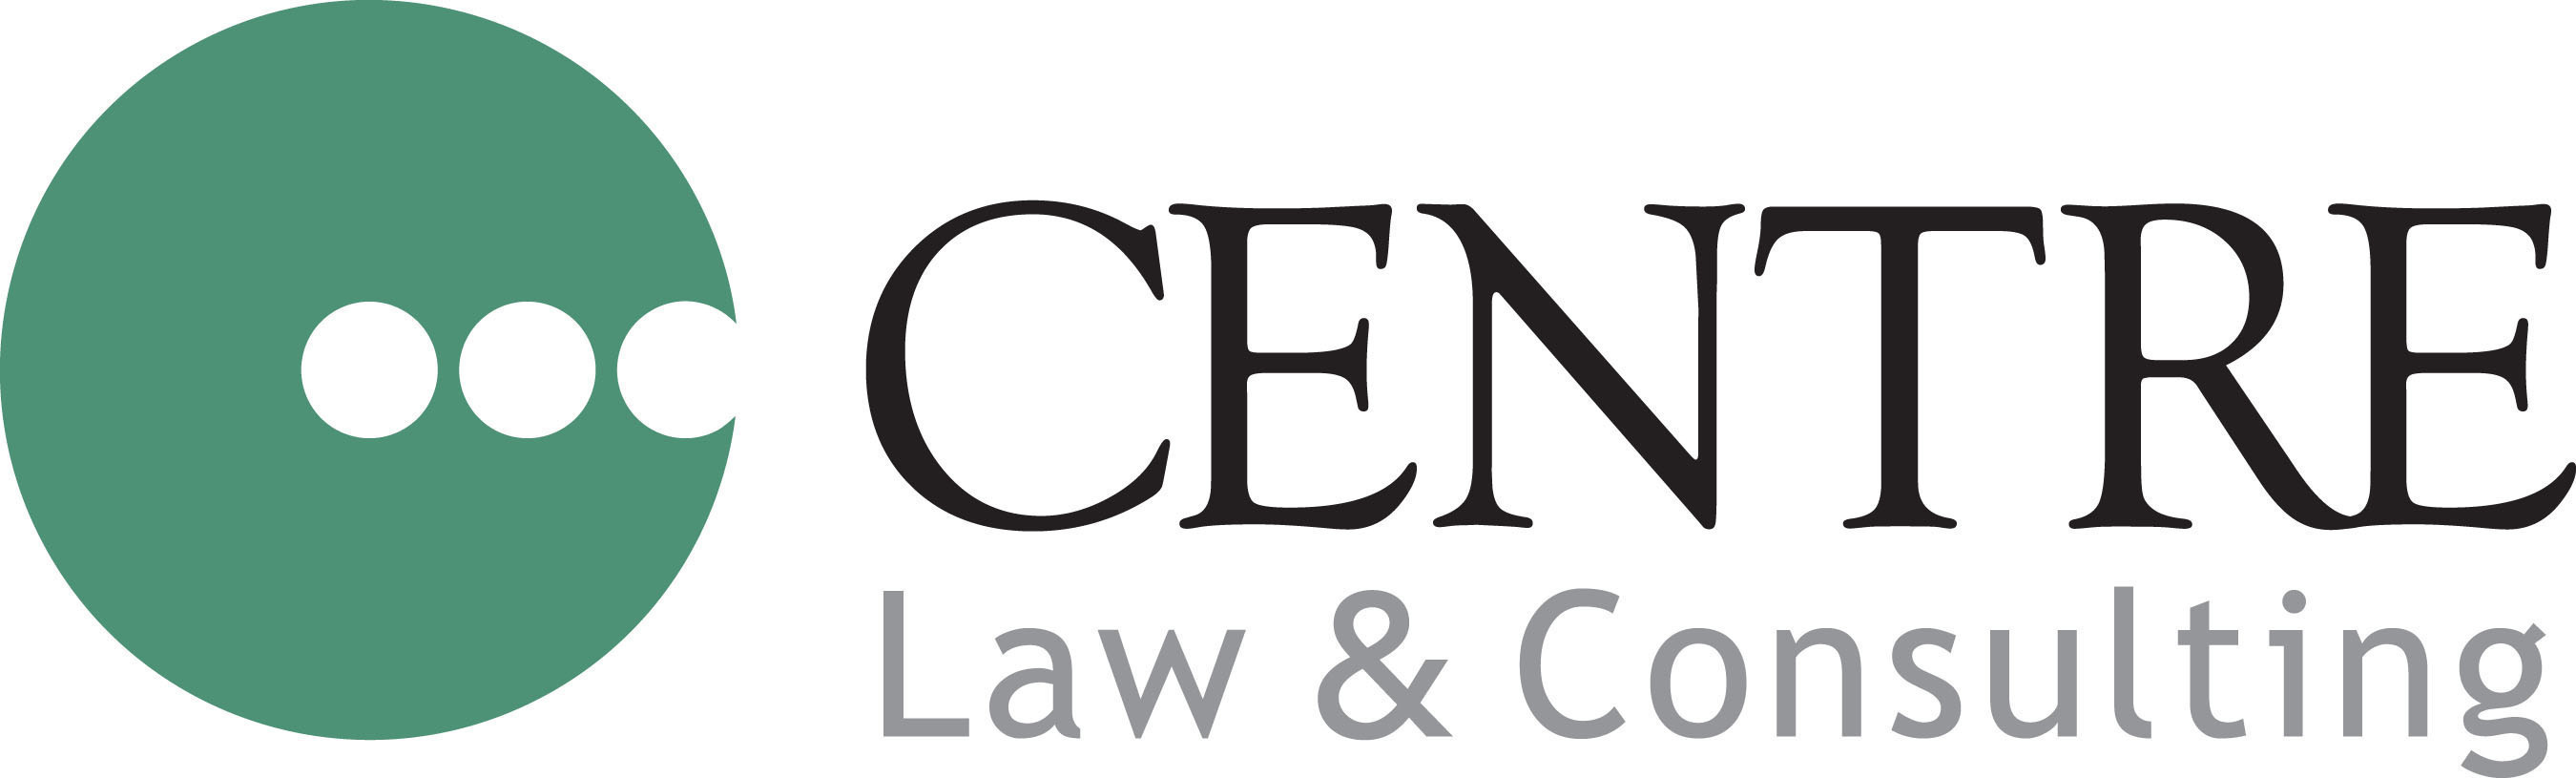 Centre Law & Consulting